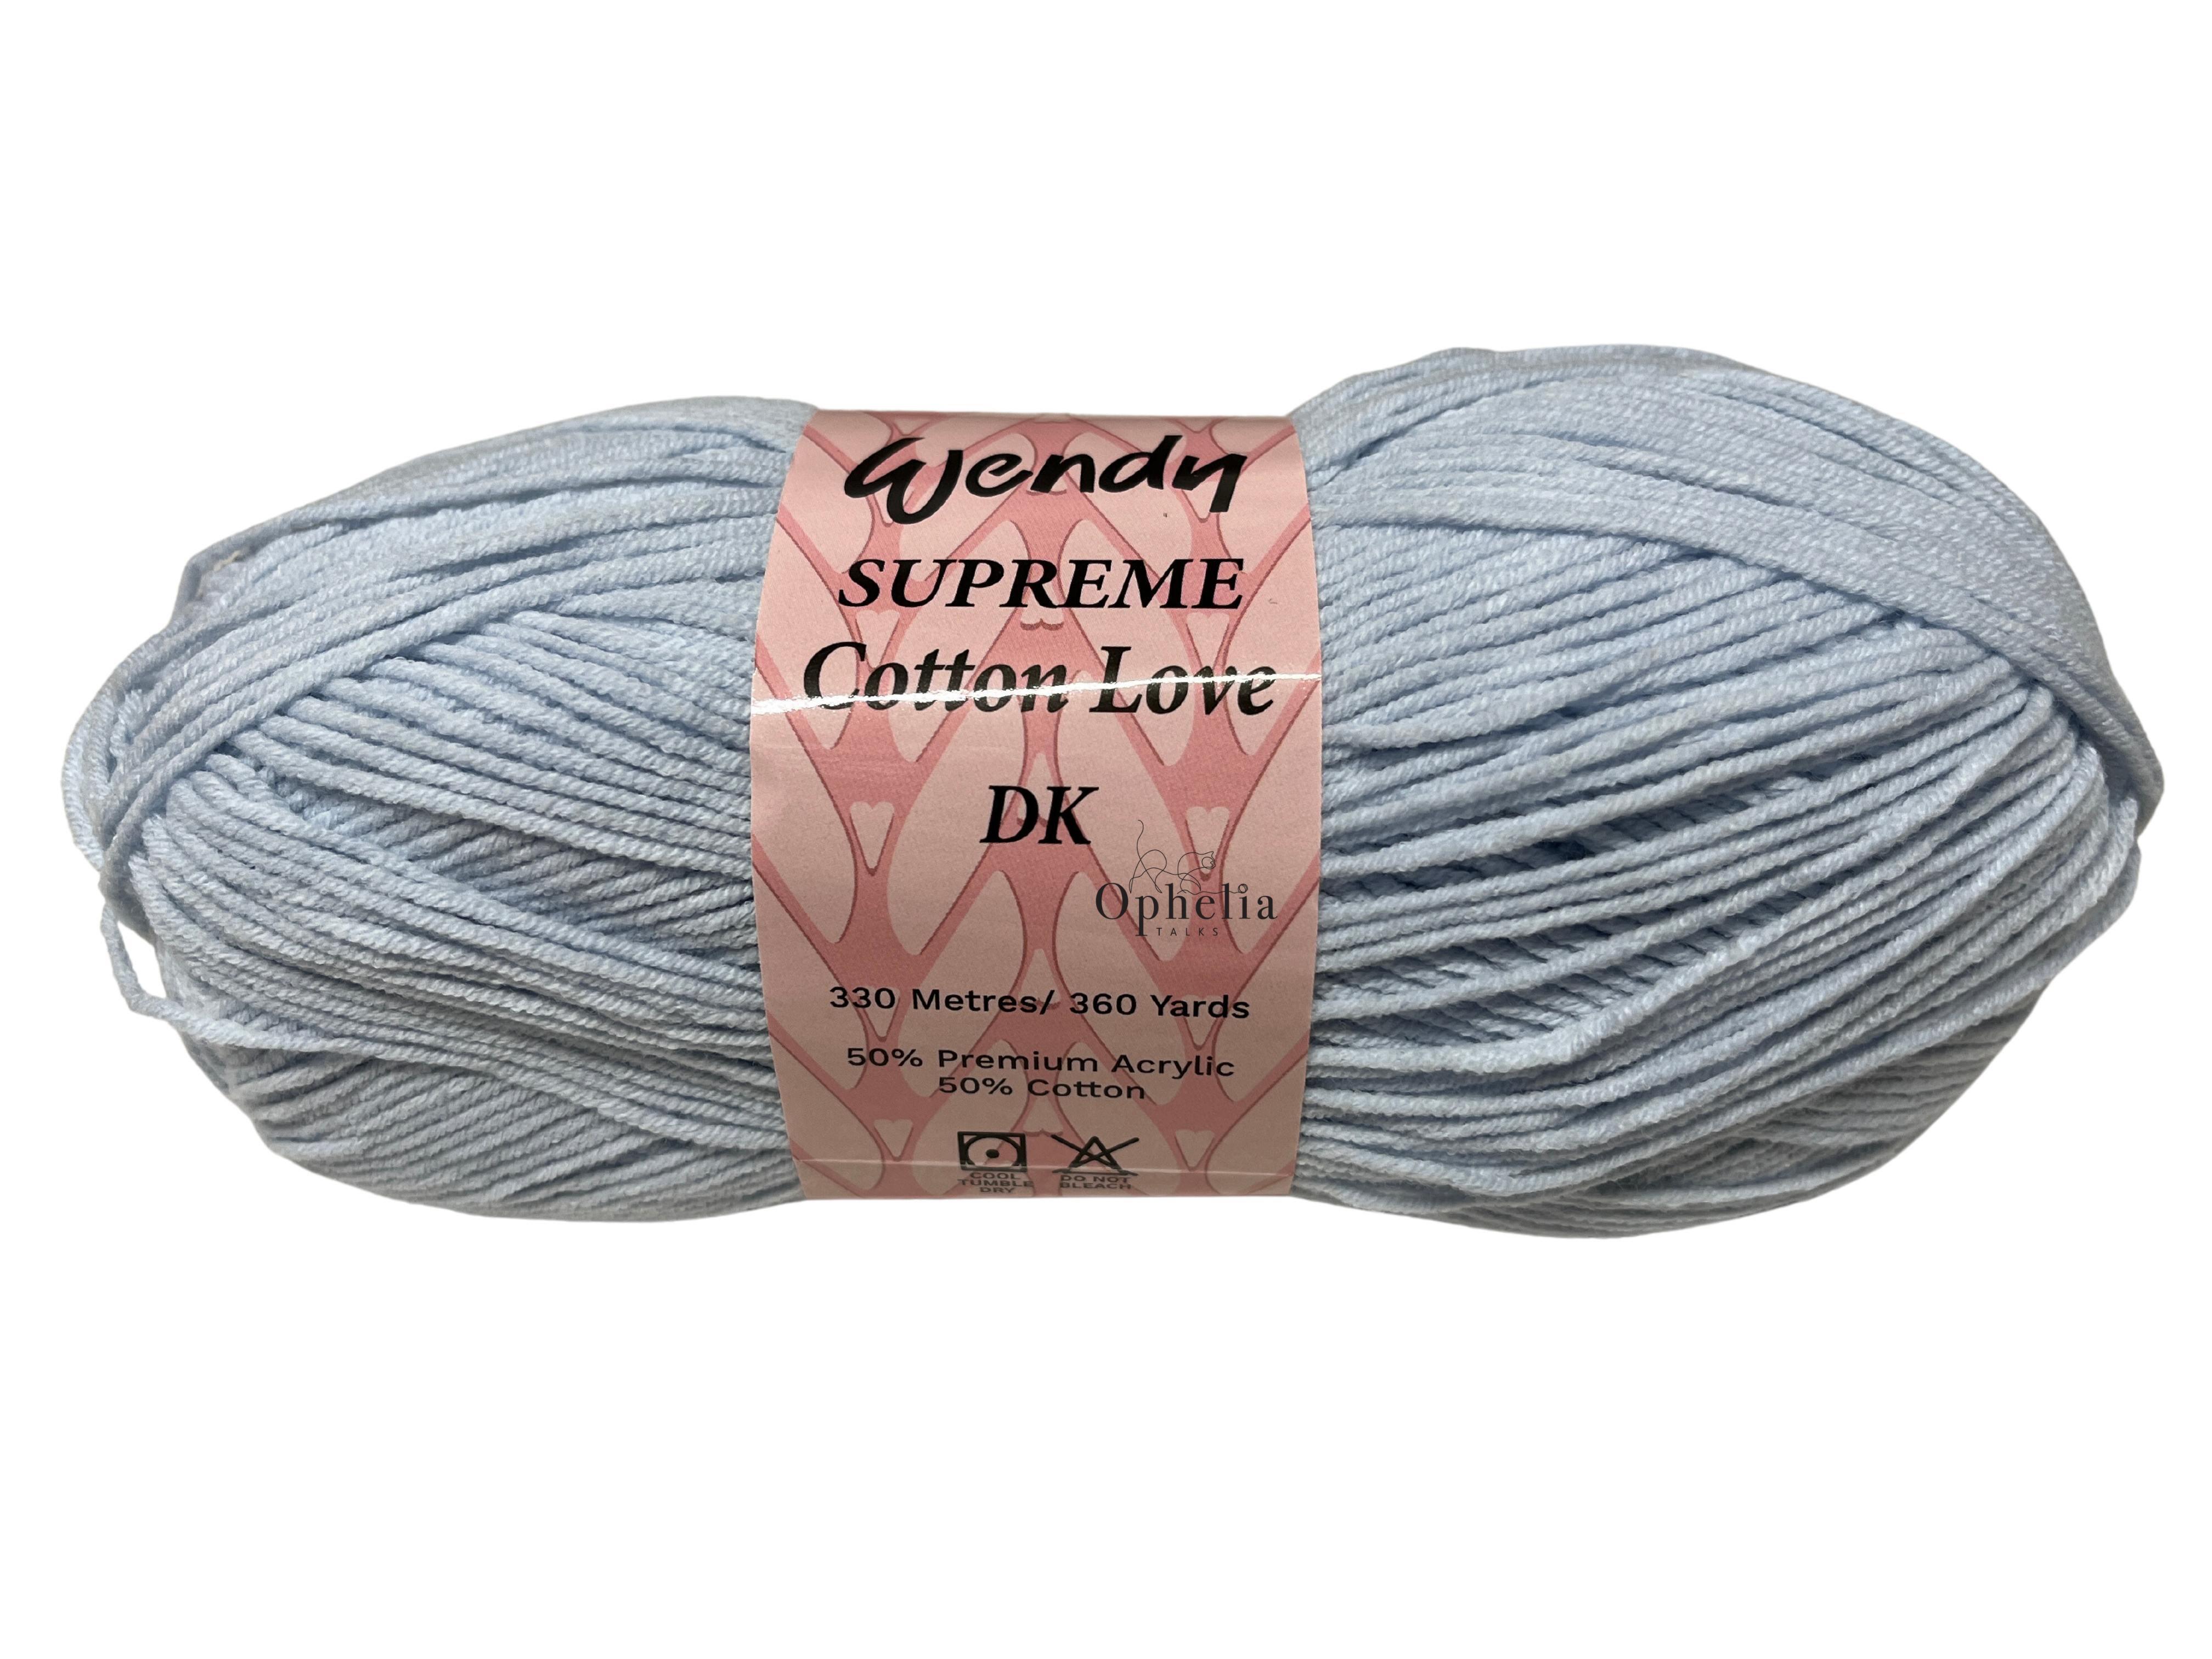 Wendy supreme cotton love in the colour Icy blue WCT05